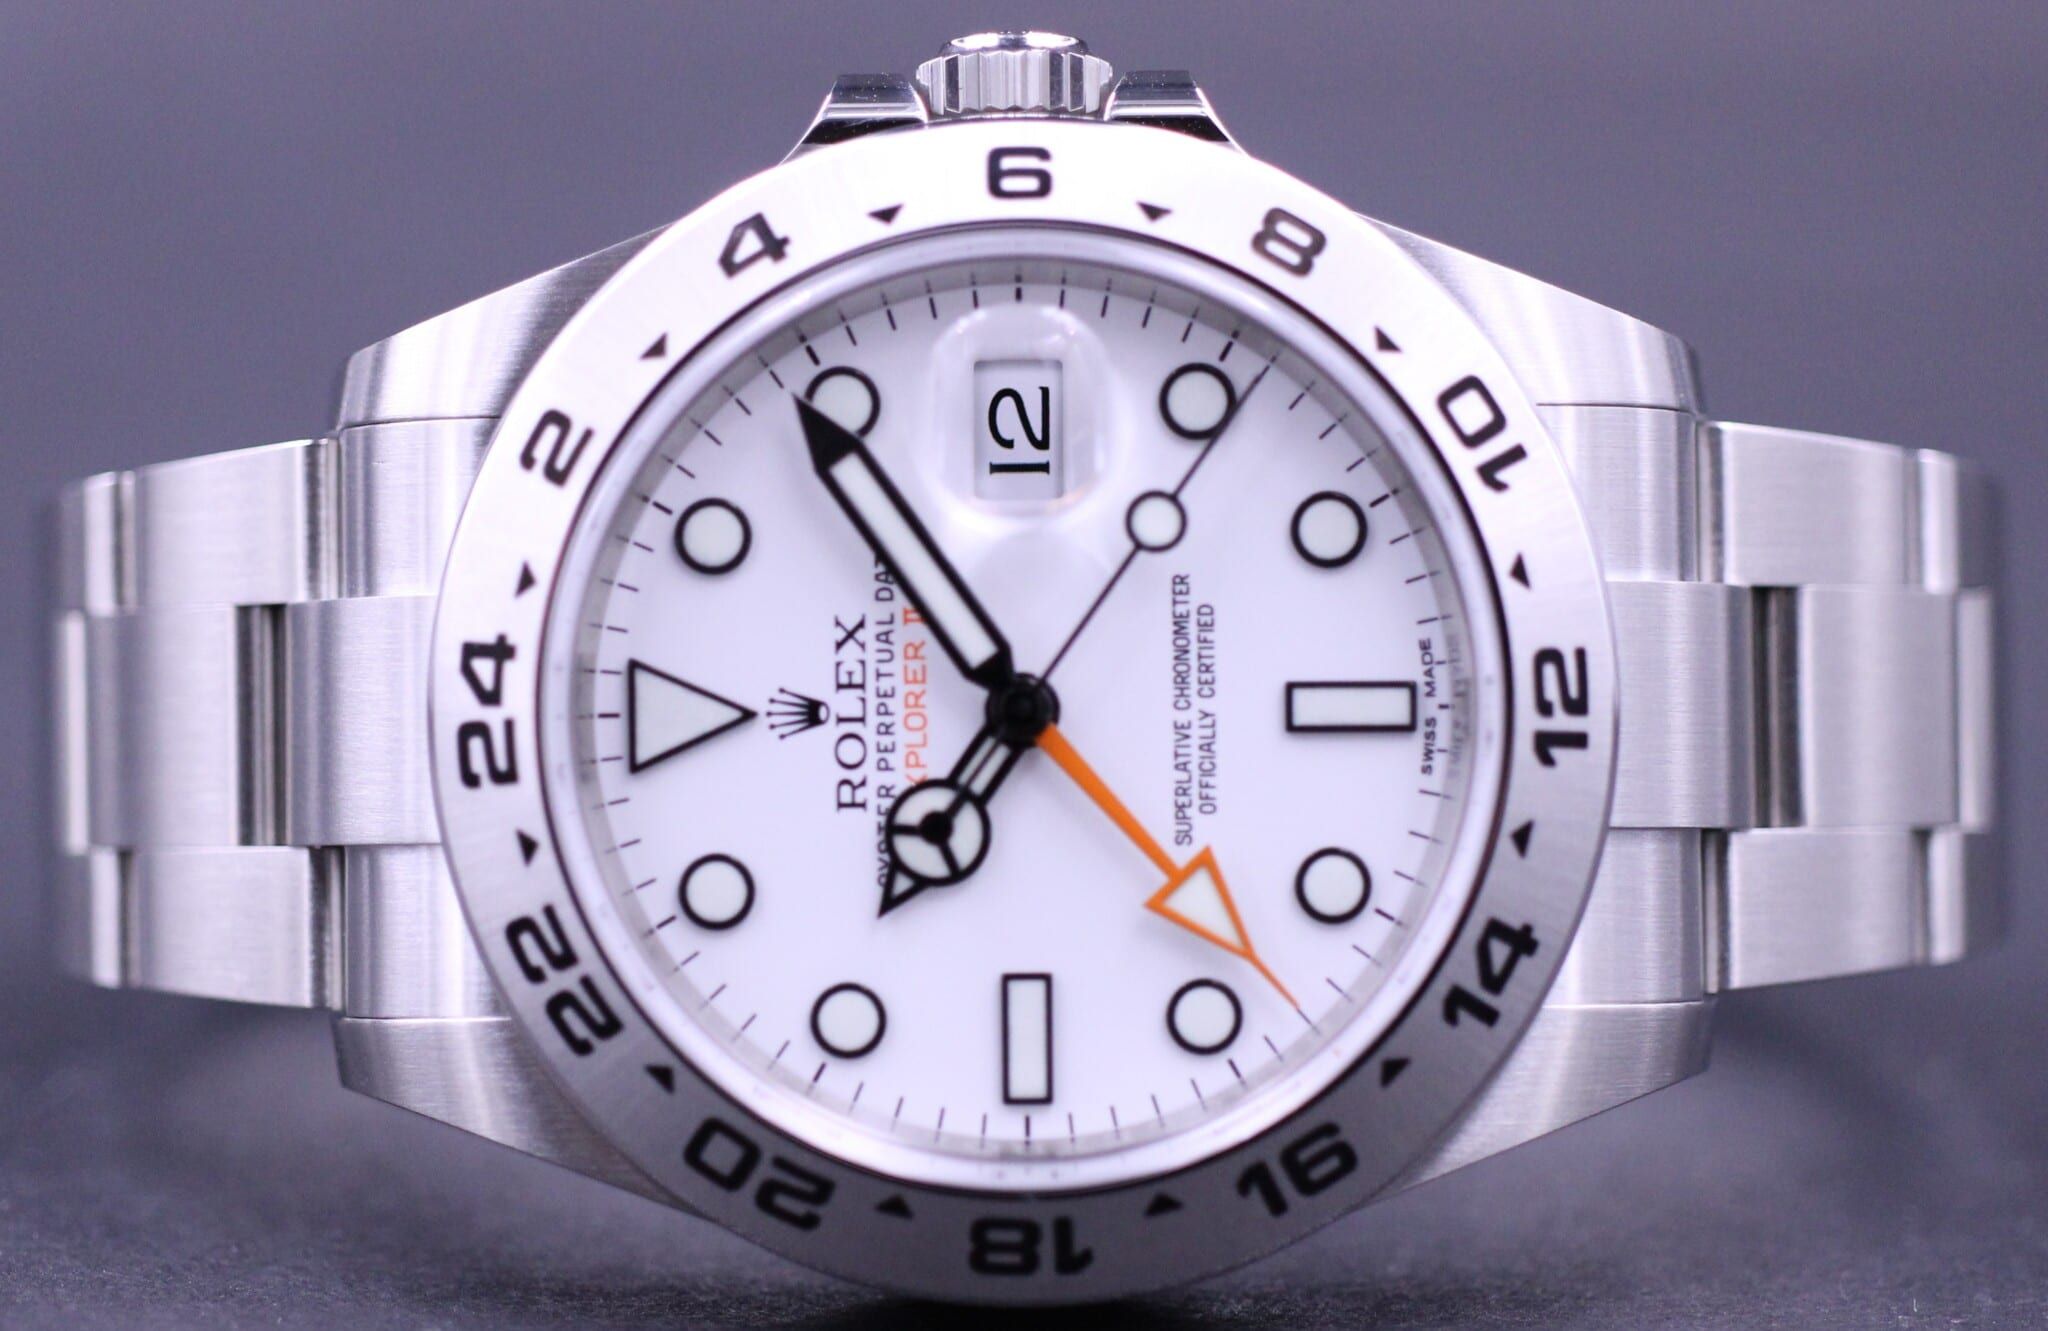 A Picture Of The Rolex Explorer II